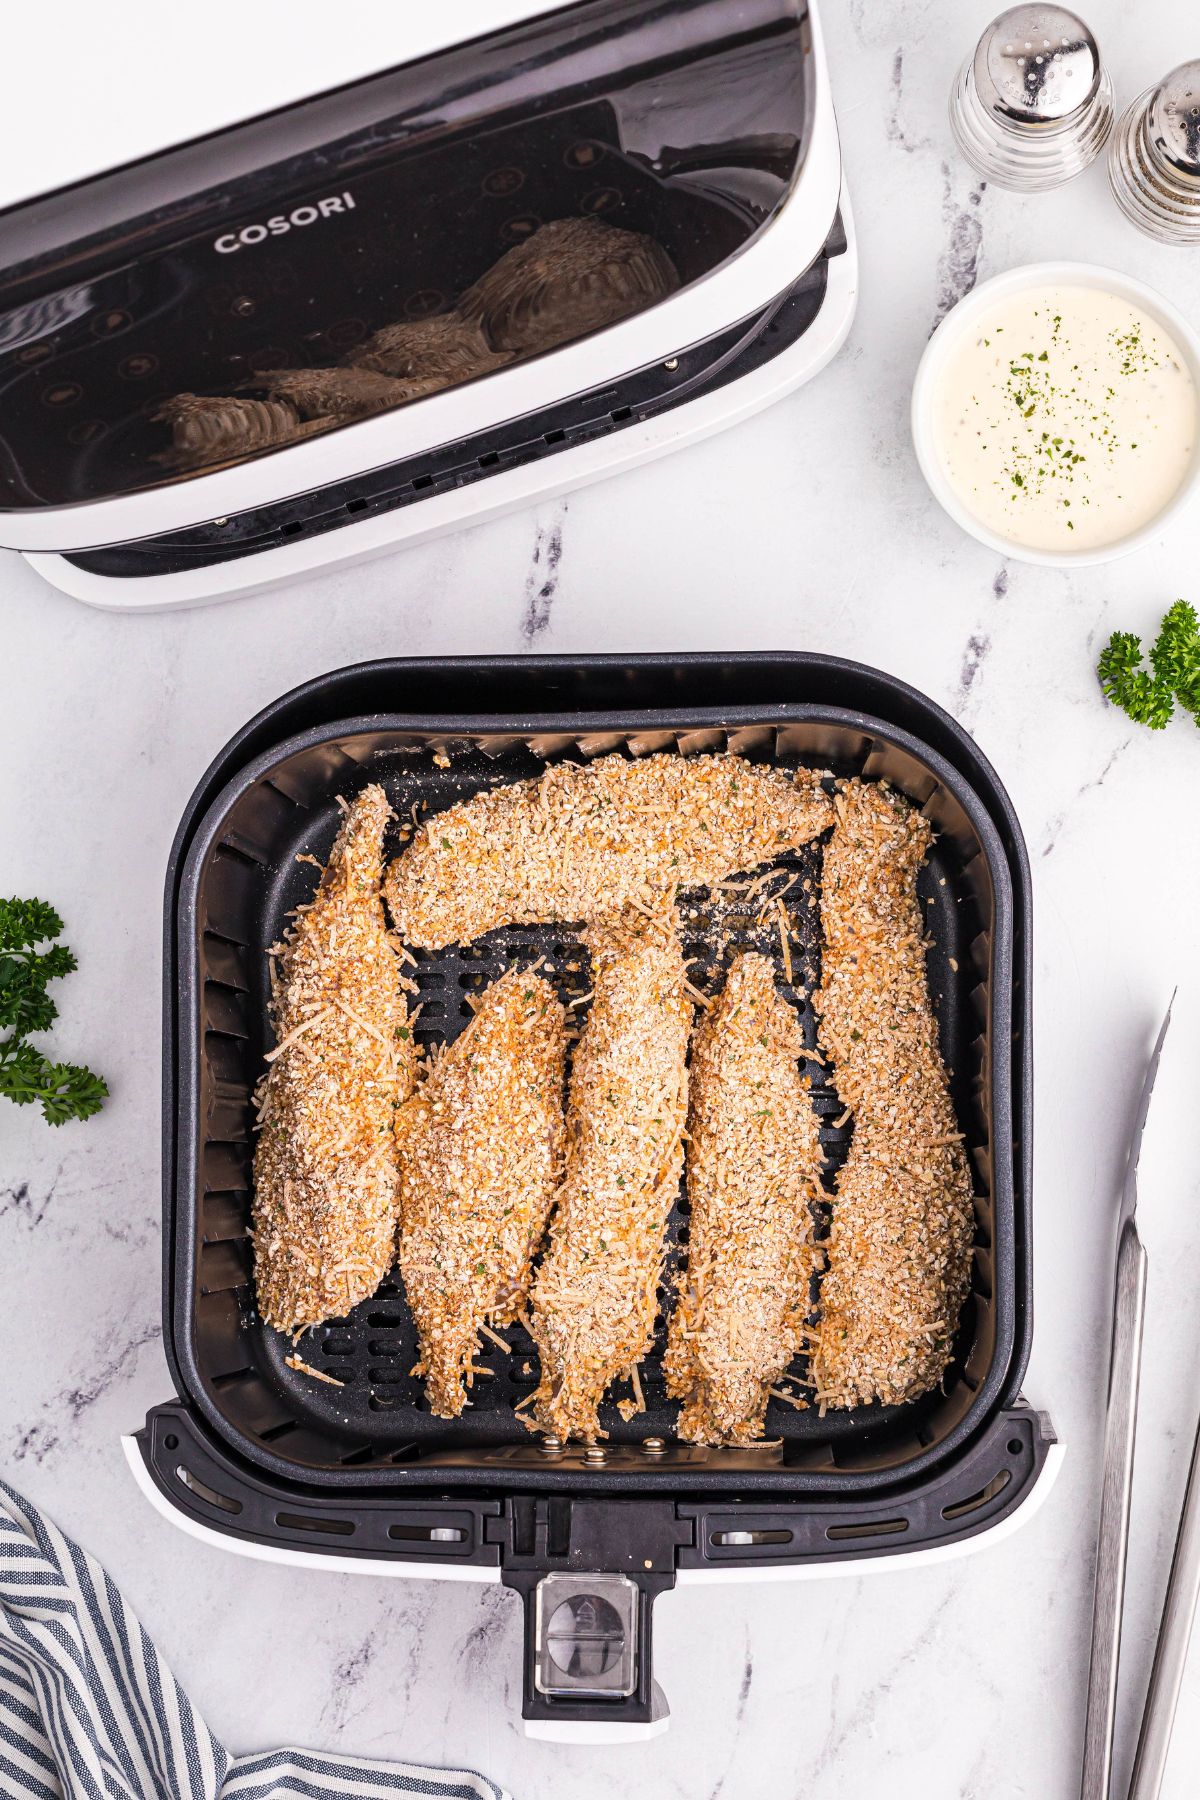 Uncooked coated chicken in an air fryer basket on a white marble table.